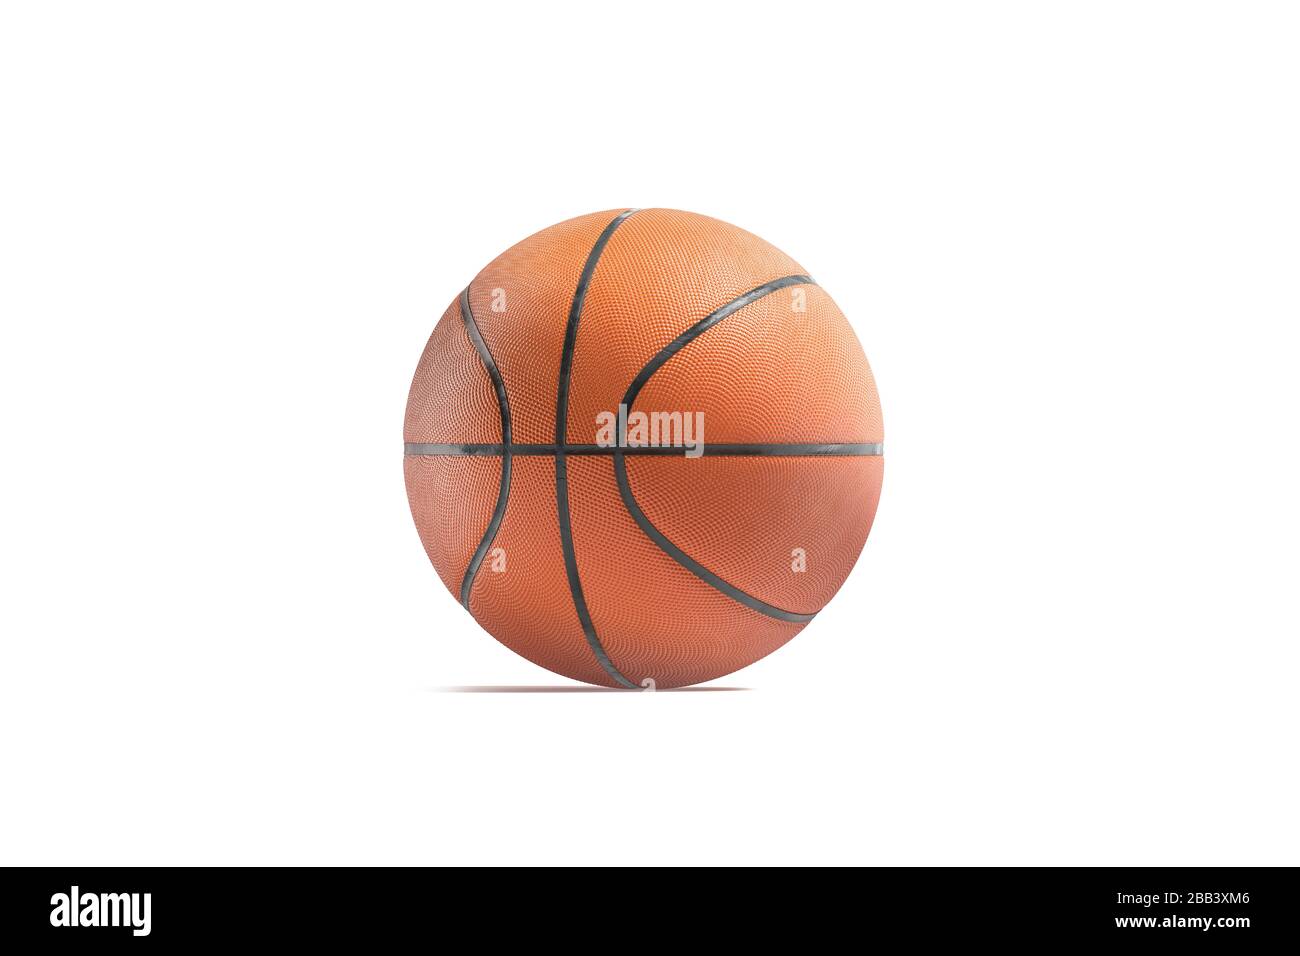 Download Blank Rubber Basketball Ball Mockup Front View 3d Rendering Empty Playing Textured Sphere For Competitive Mock Up Isolated Clear Orange Ruber Bal Stock Photo Alamy